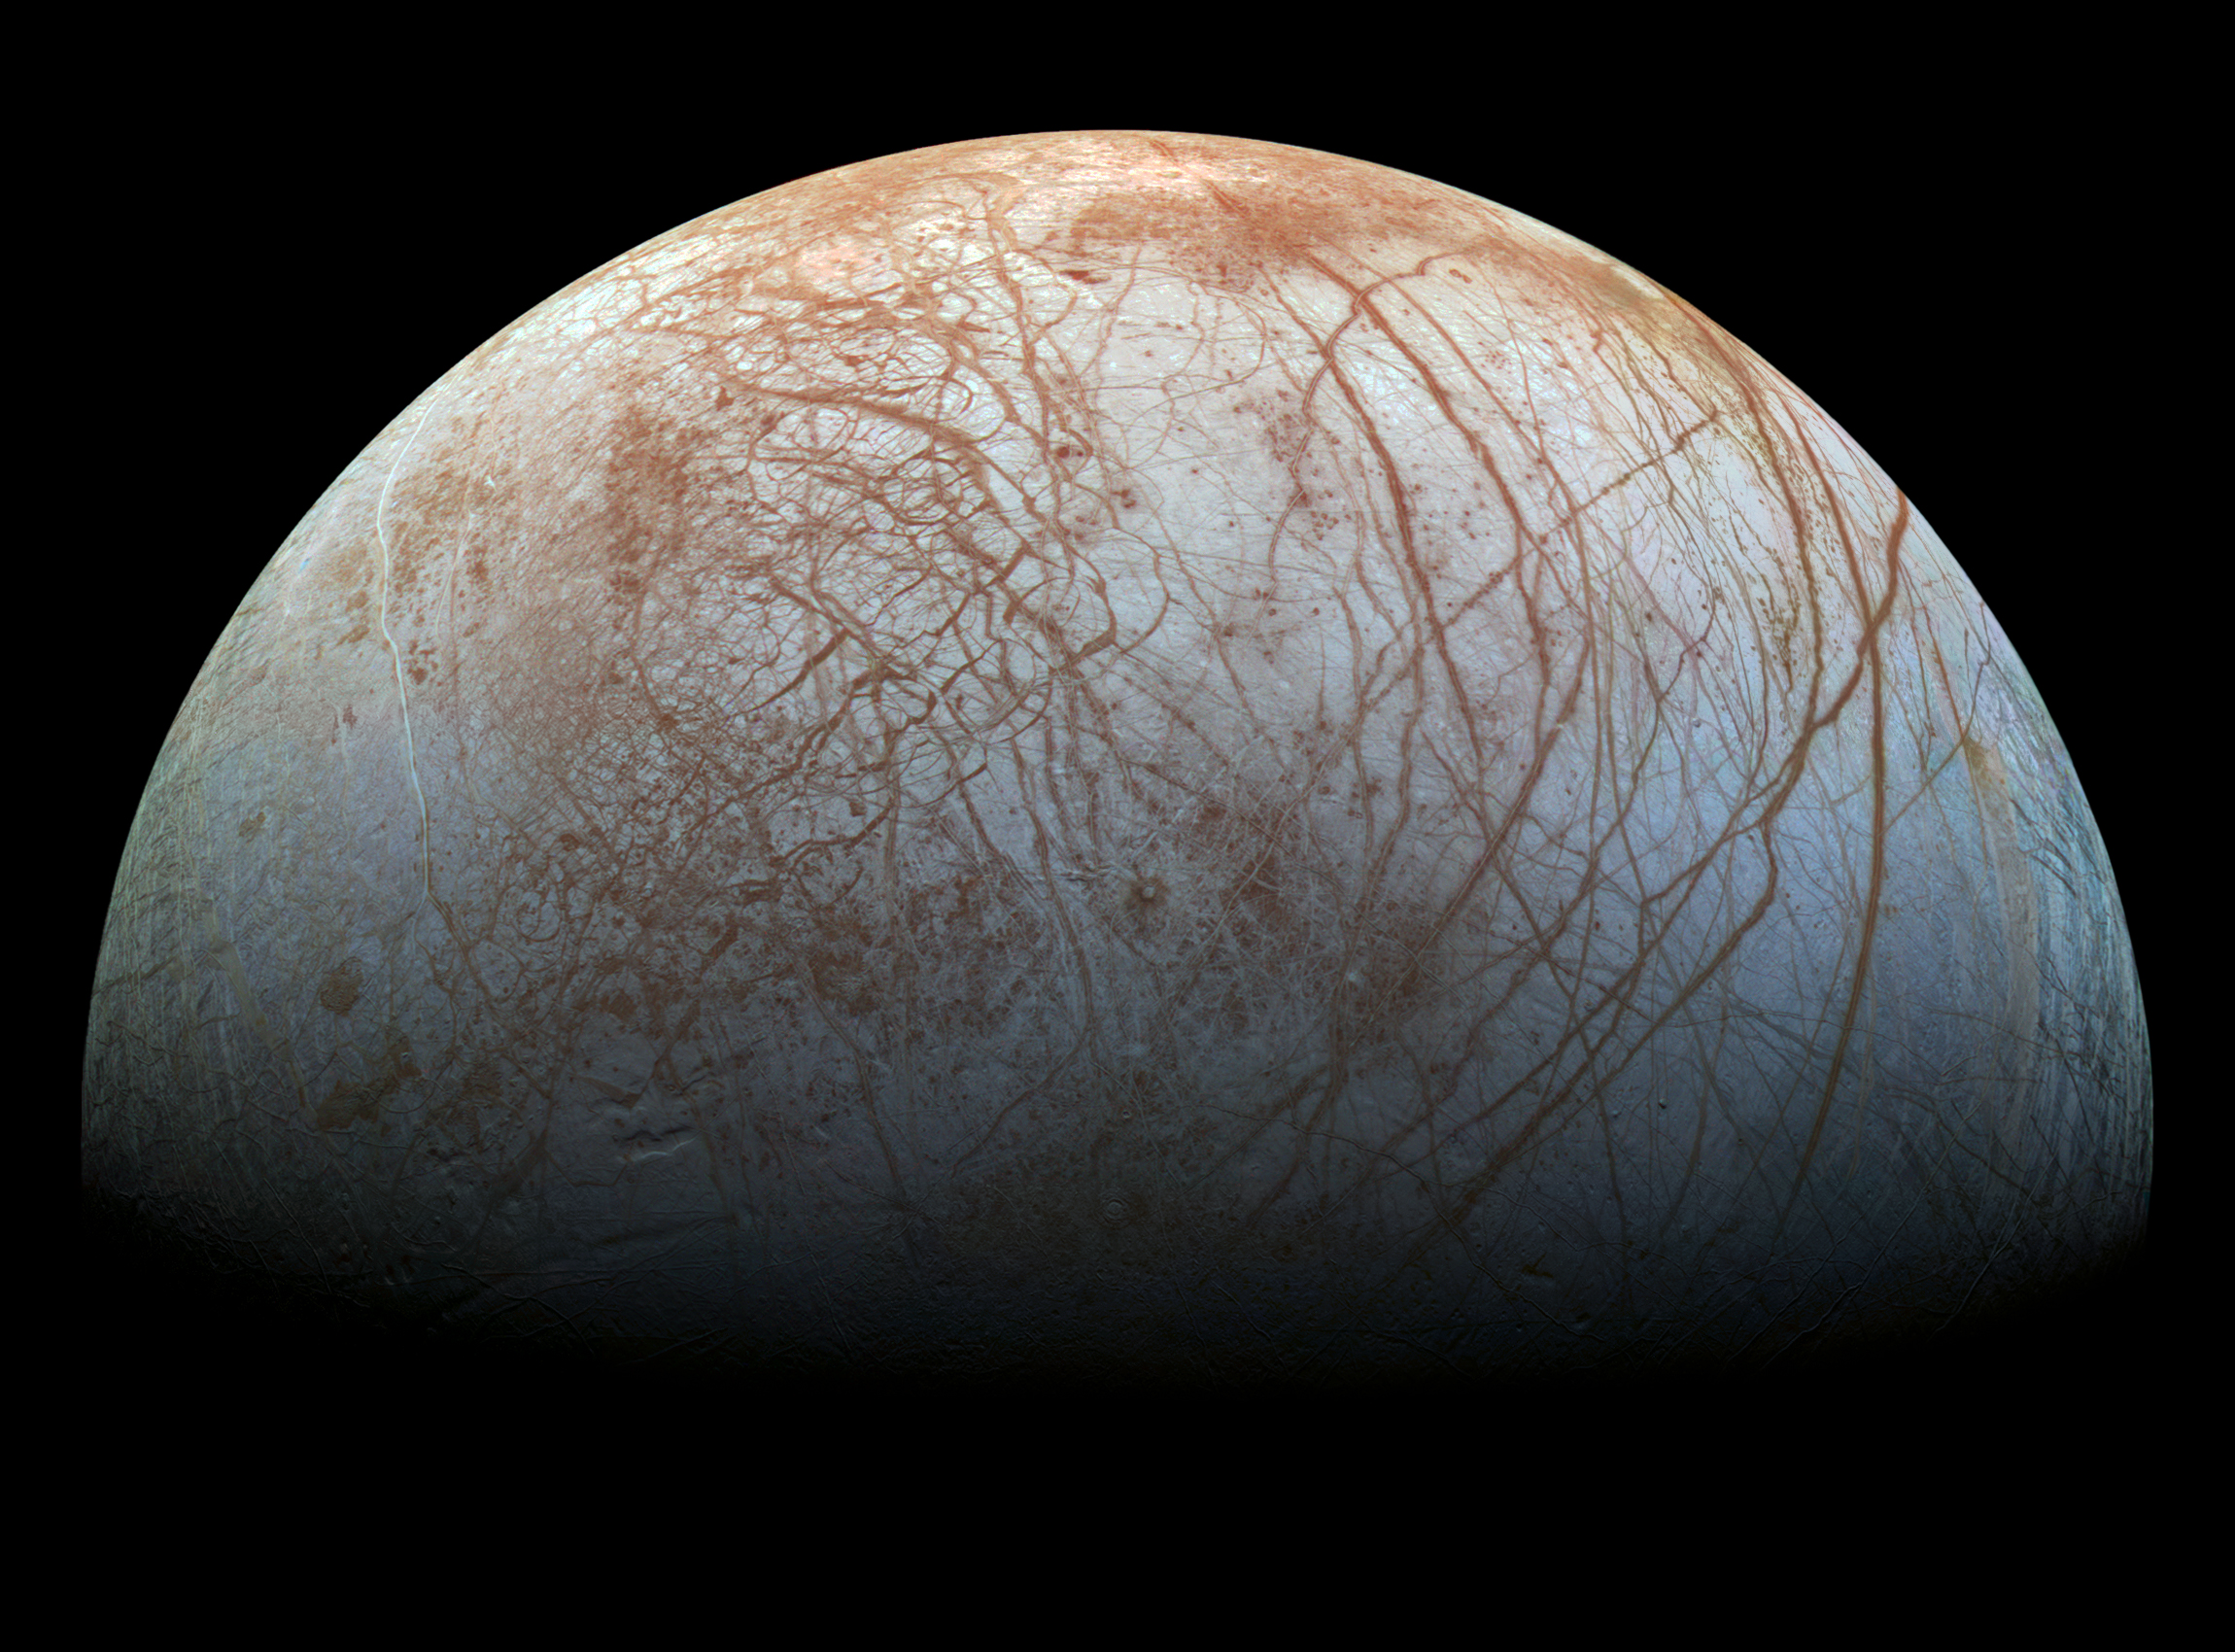 The puzzling, fascinating surface of Jupiter's icy moon Europa looms large in this newly-reprocessed color view.